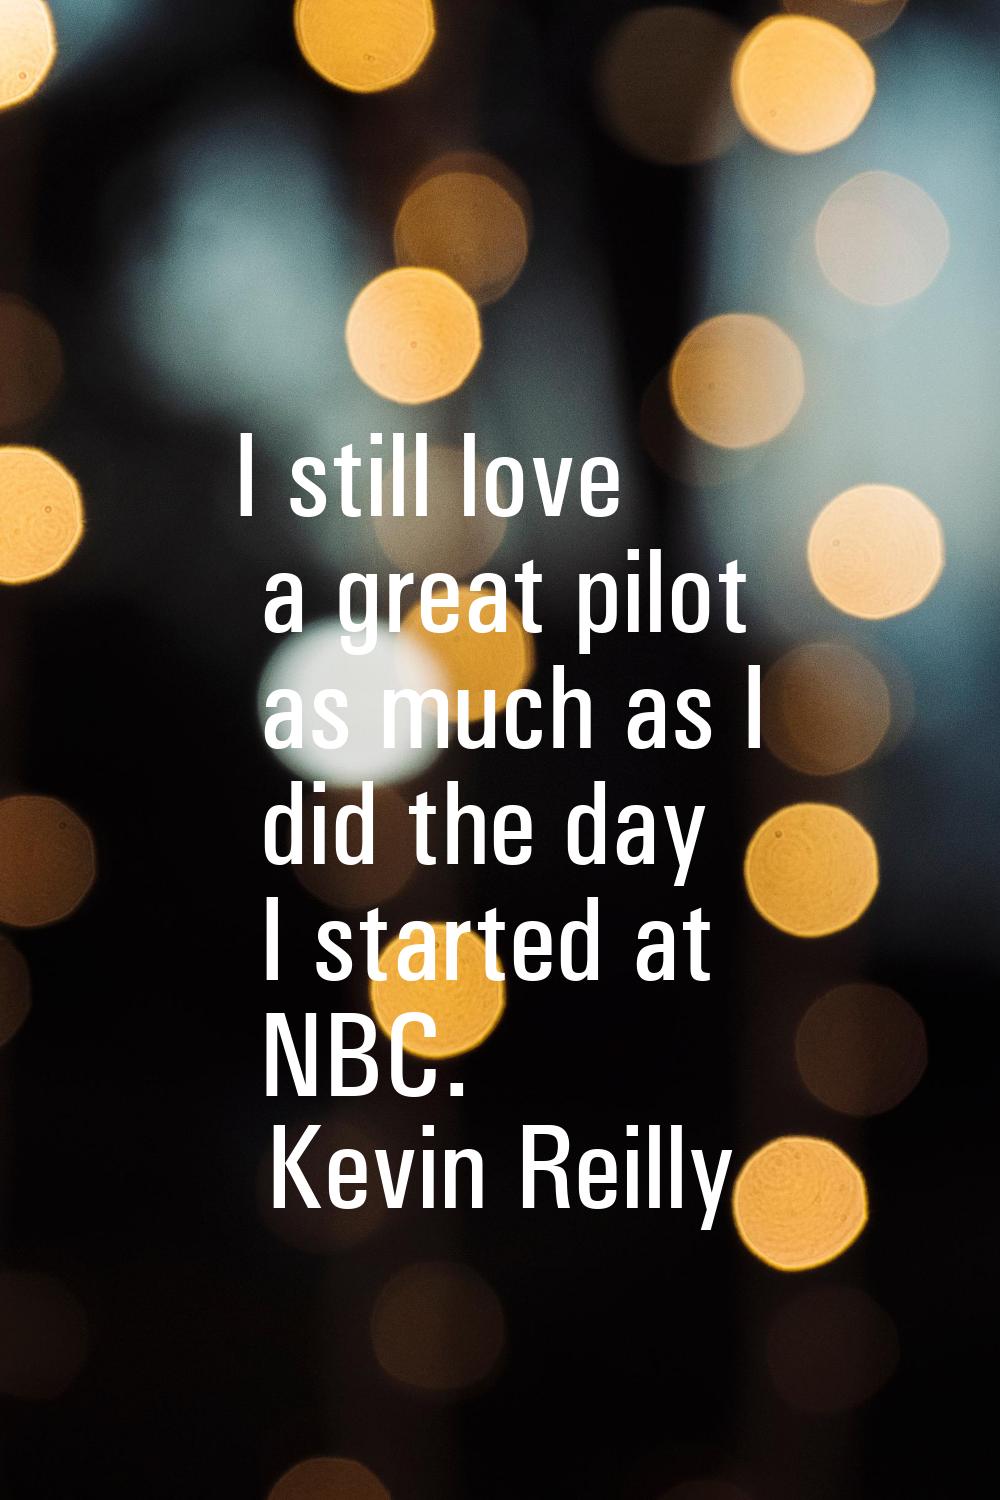 I still love a great pilot as much as I did the day I started at NBC.